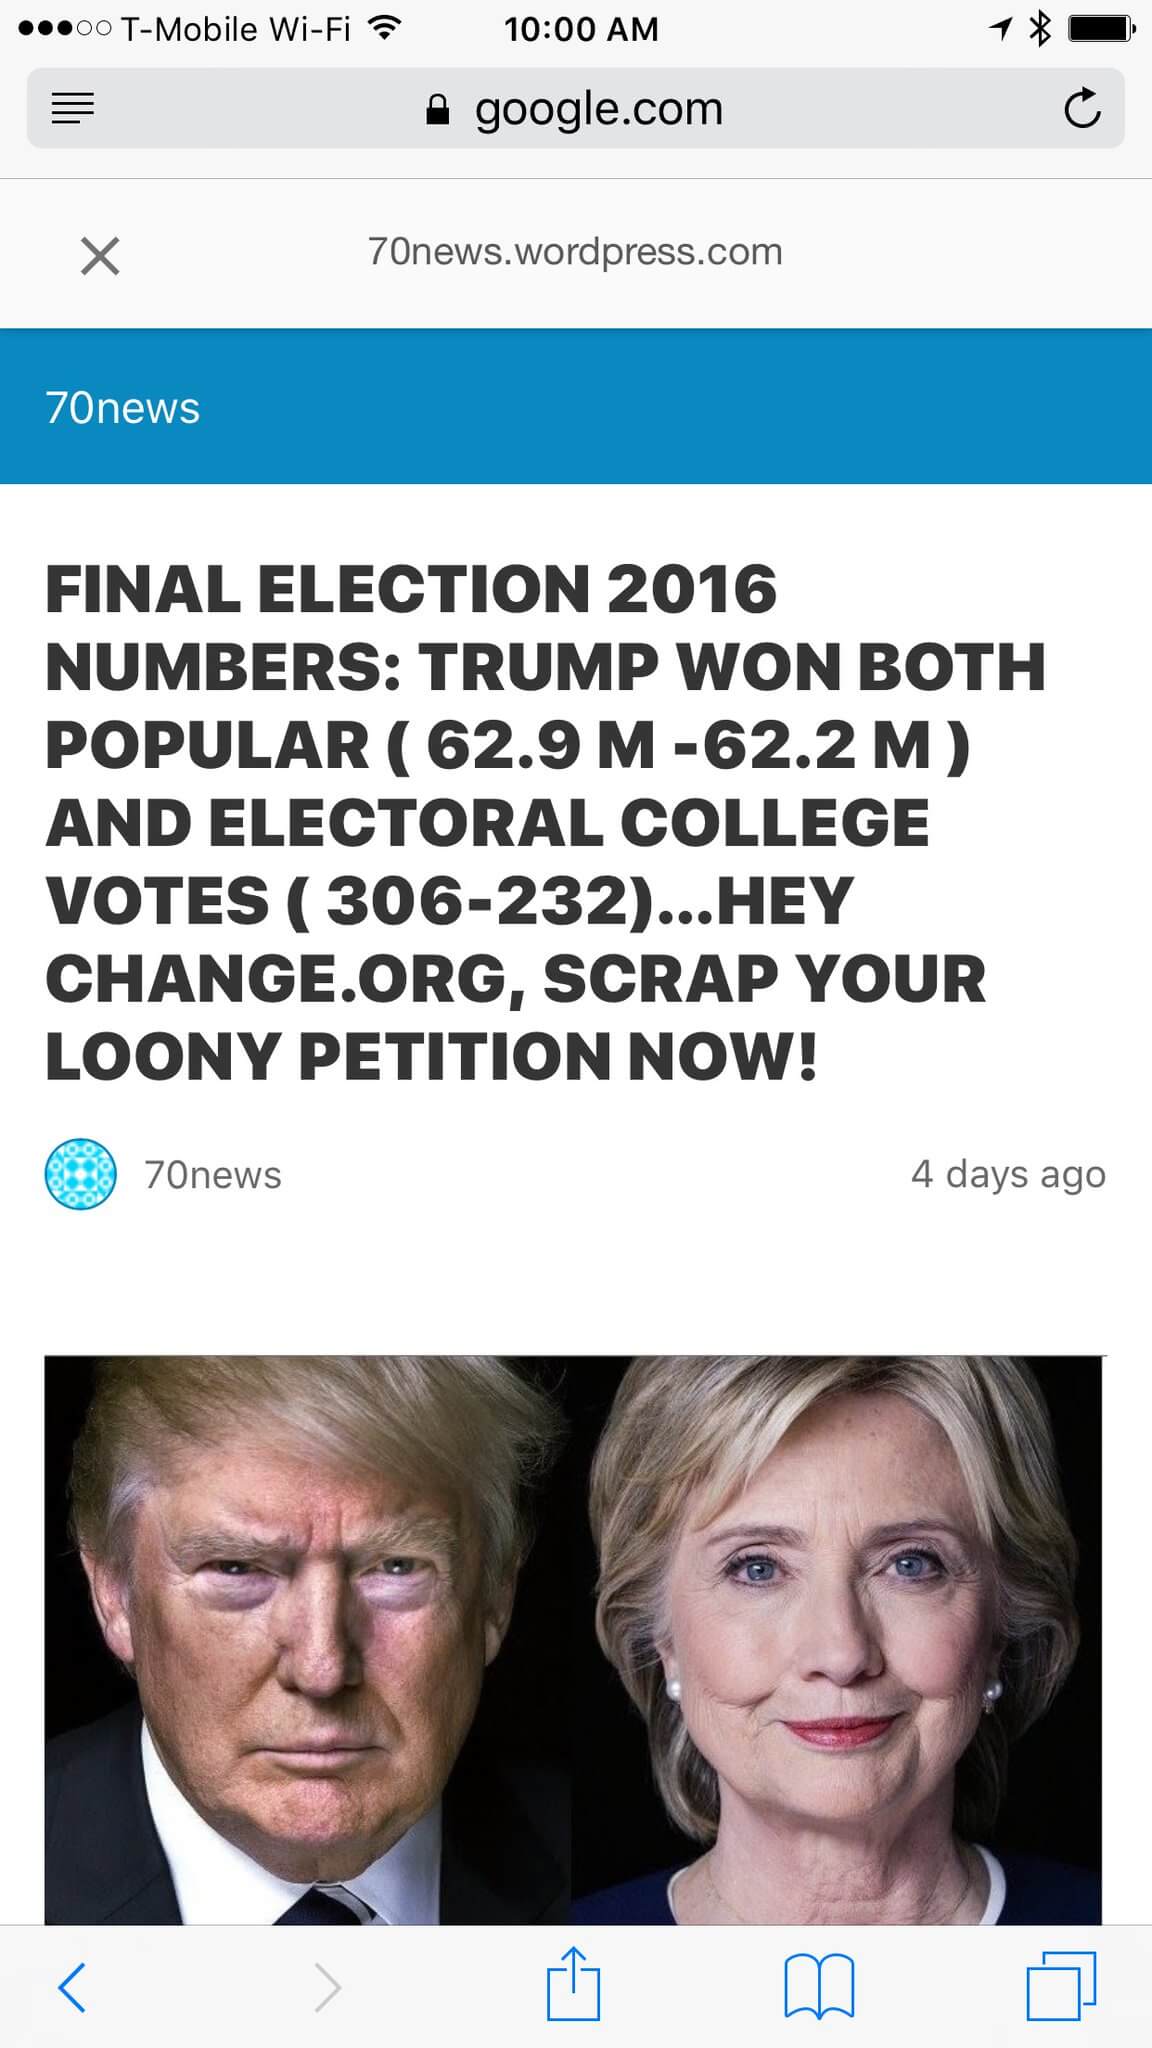 Screen shot of 70news.wordpress.com with the headline “Final election 2016 numbers: Trump won both popular (62.9M - 62.2M) and electoral college votes (306-232)… Hey change.org, scrap your loony petition now”.